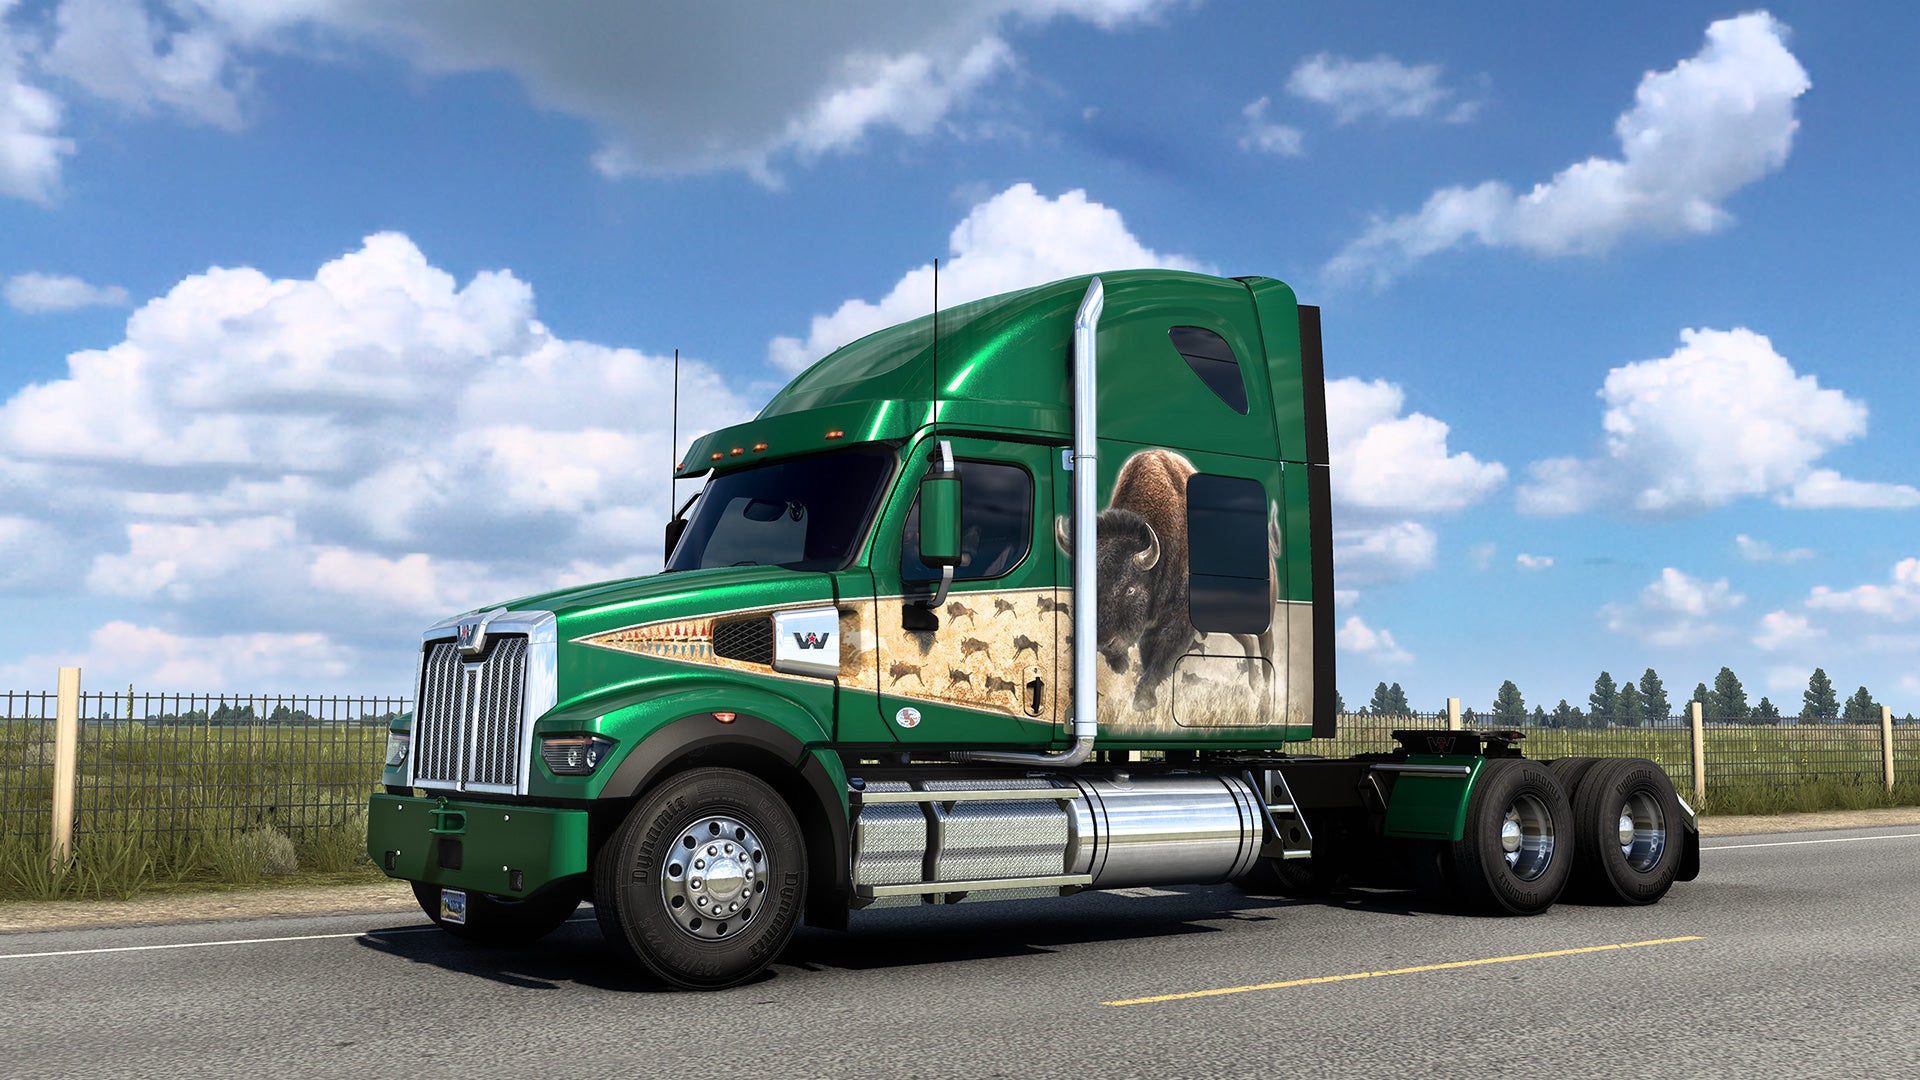 American Truck SImulator Wyoming DLC - An unloaded semi truck cab drives along an open road. The truck is green with a large bison painted on the side.